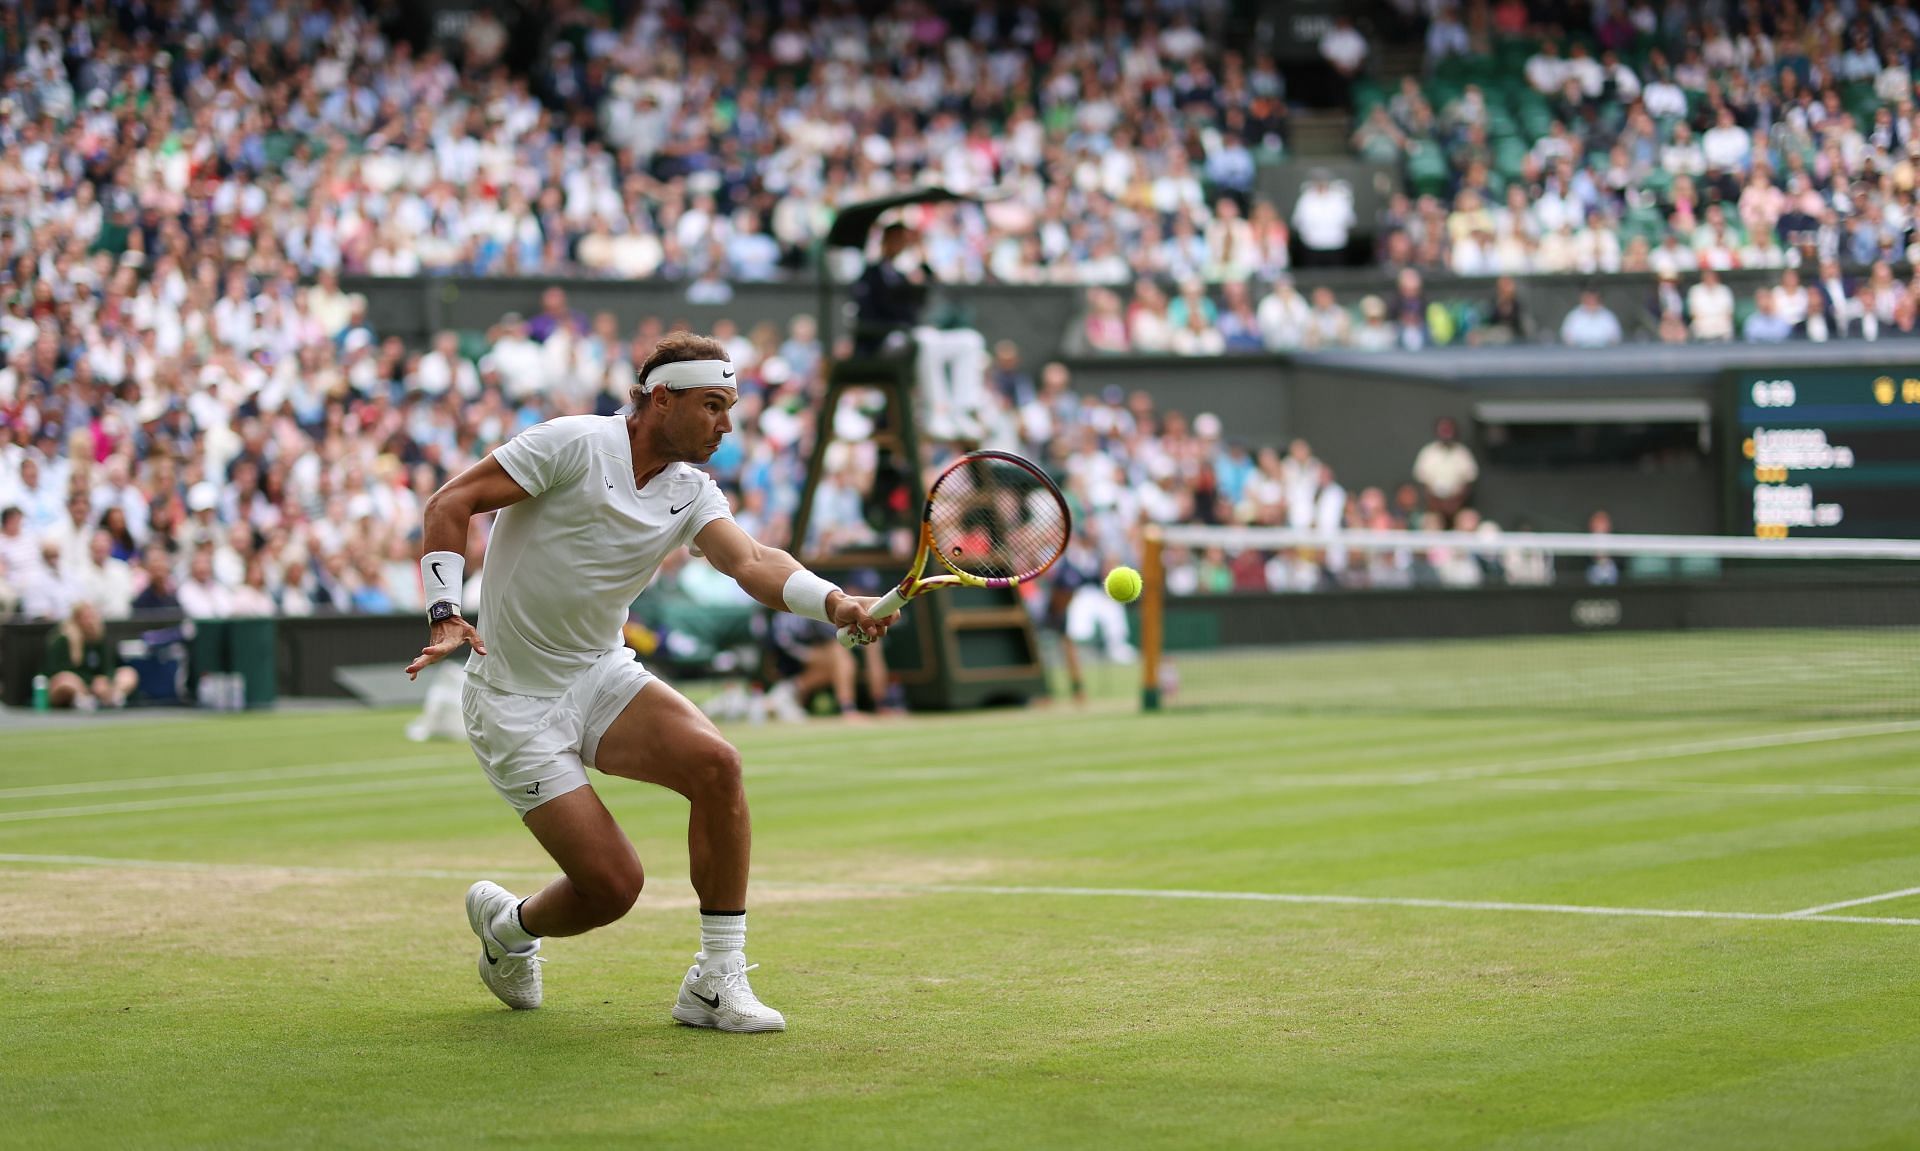 Nadal in action at the 2022 Wimbledon Championships